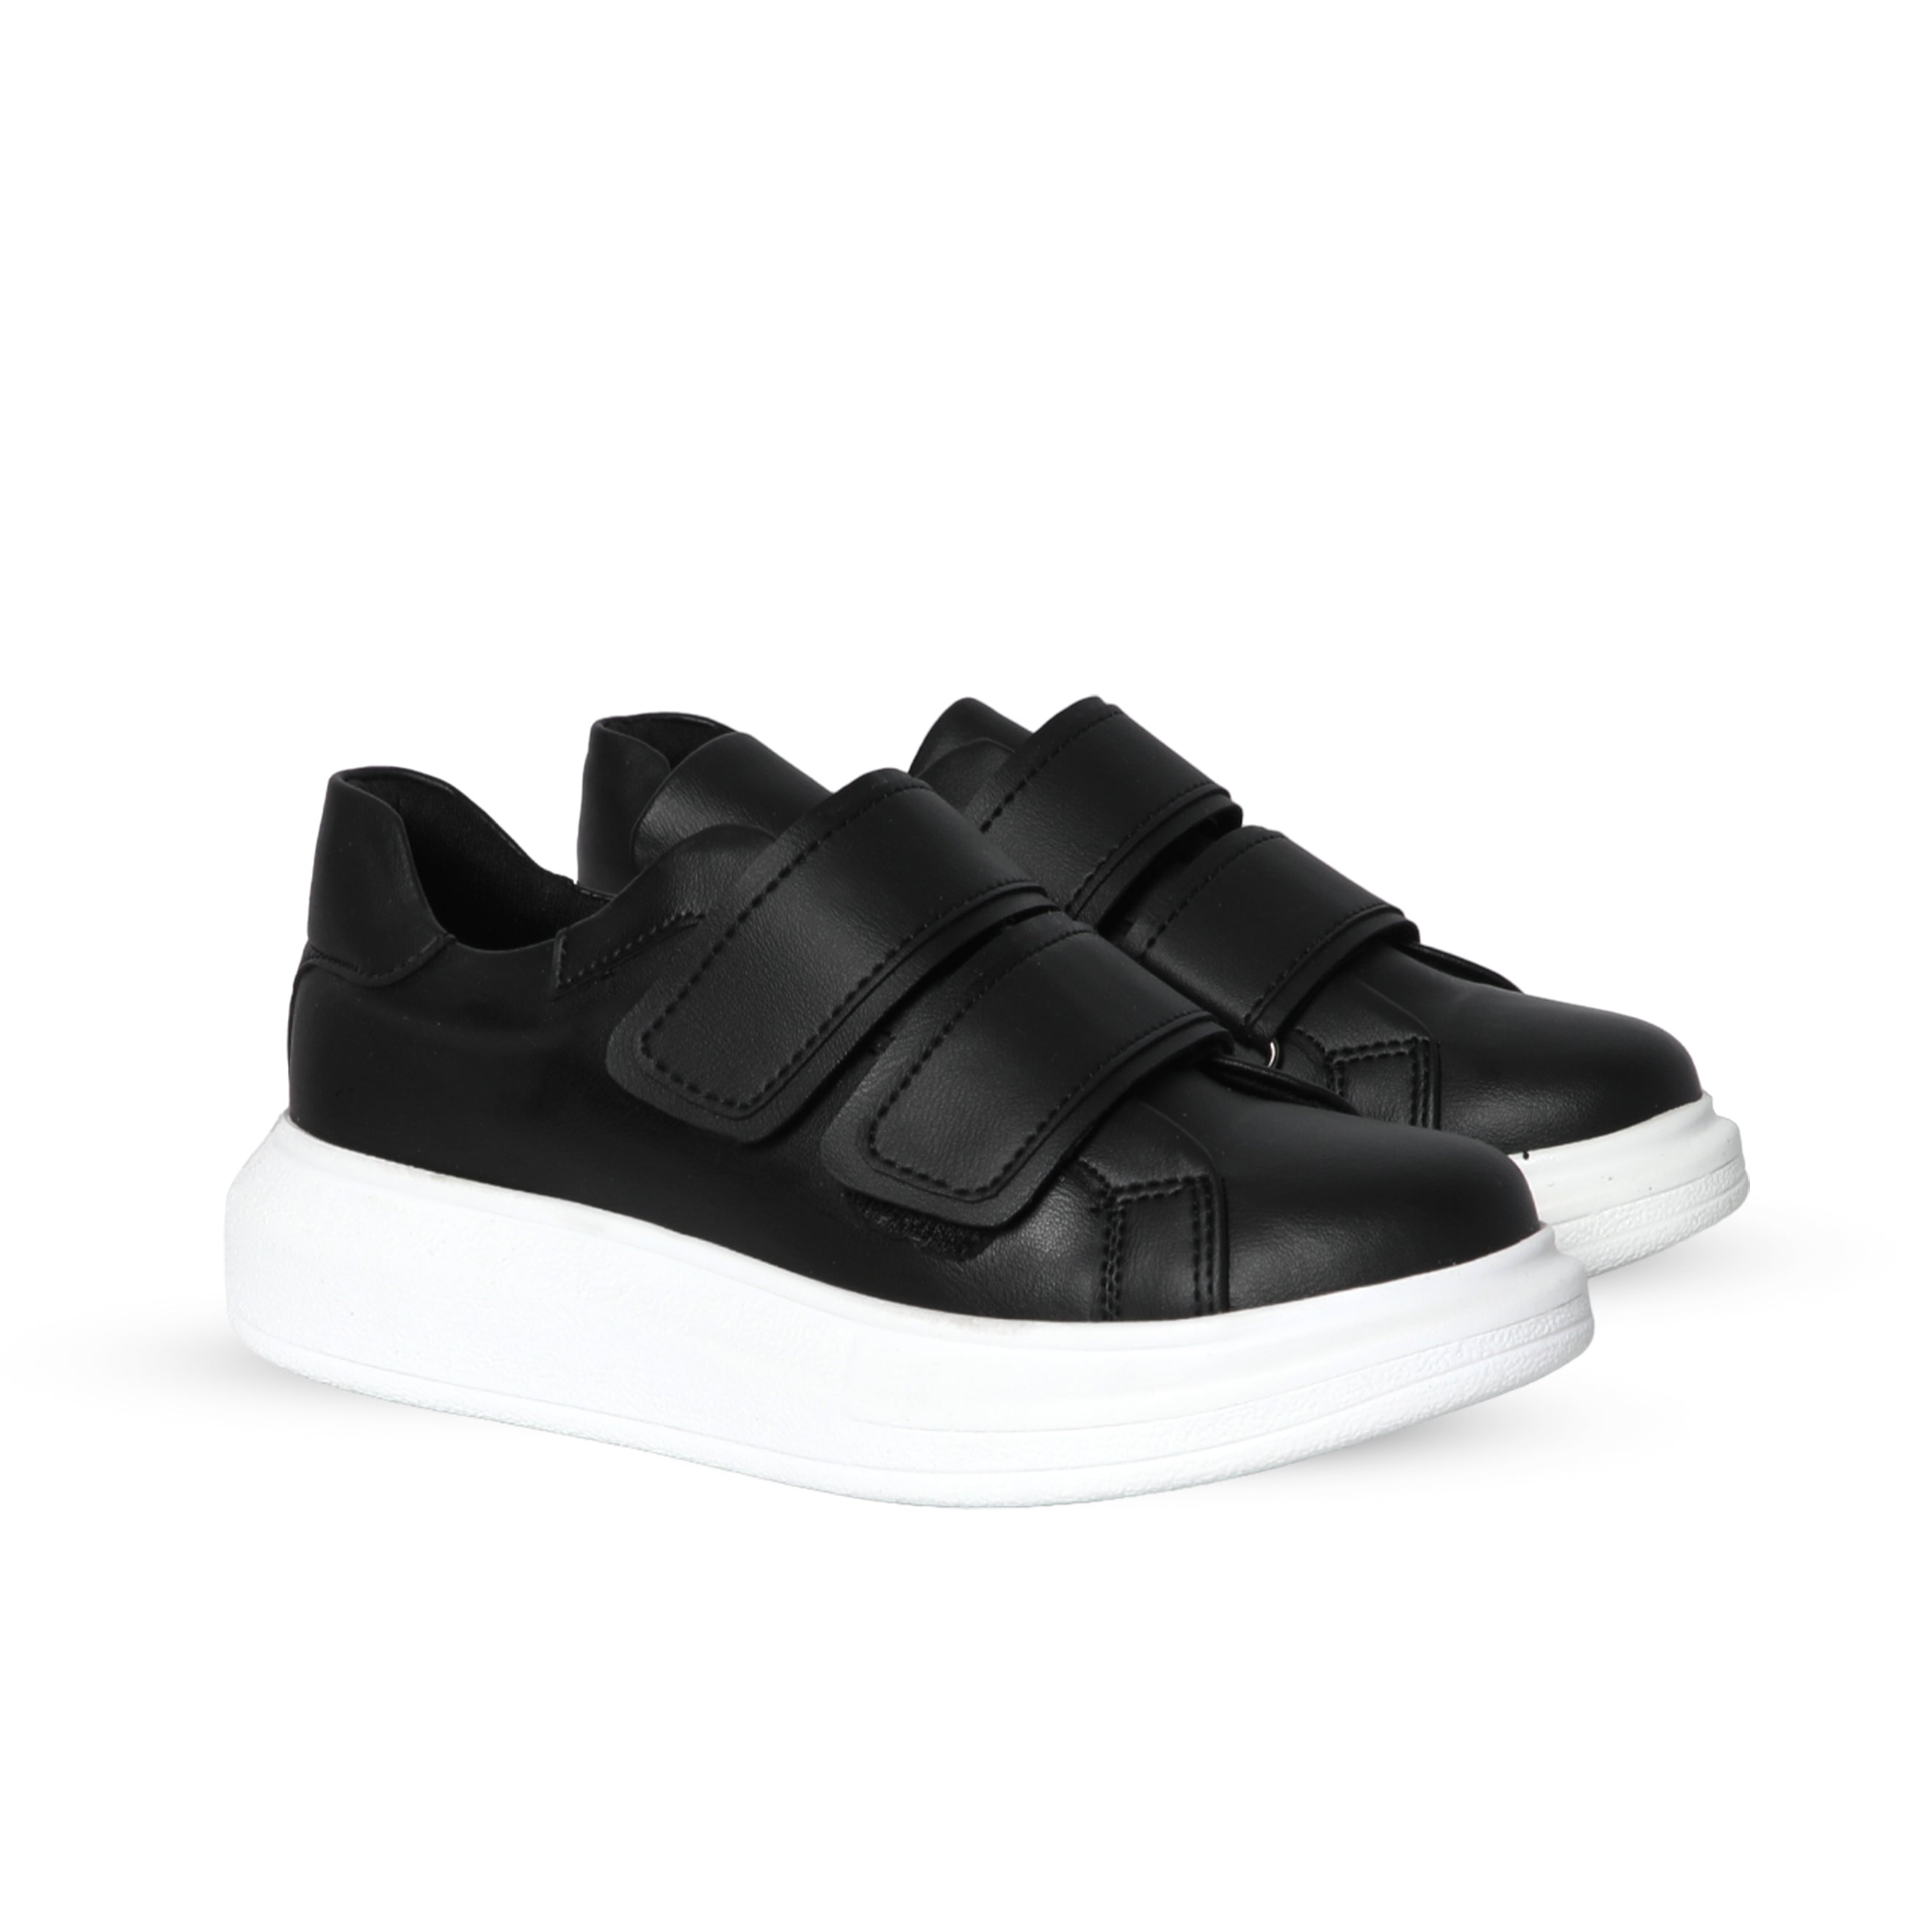 Women Black Casual Shoes With Velcro Straps